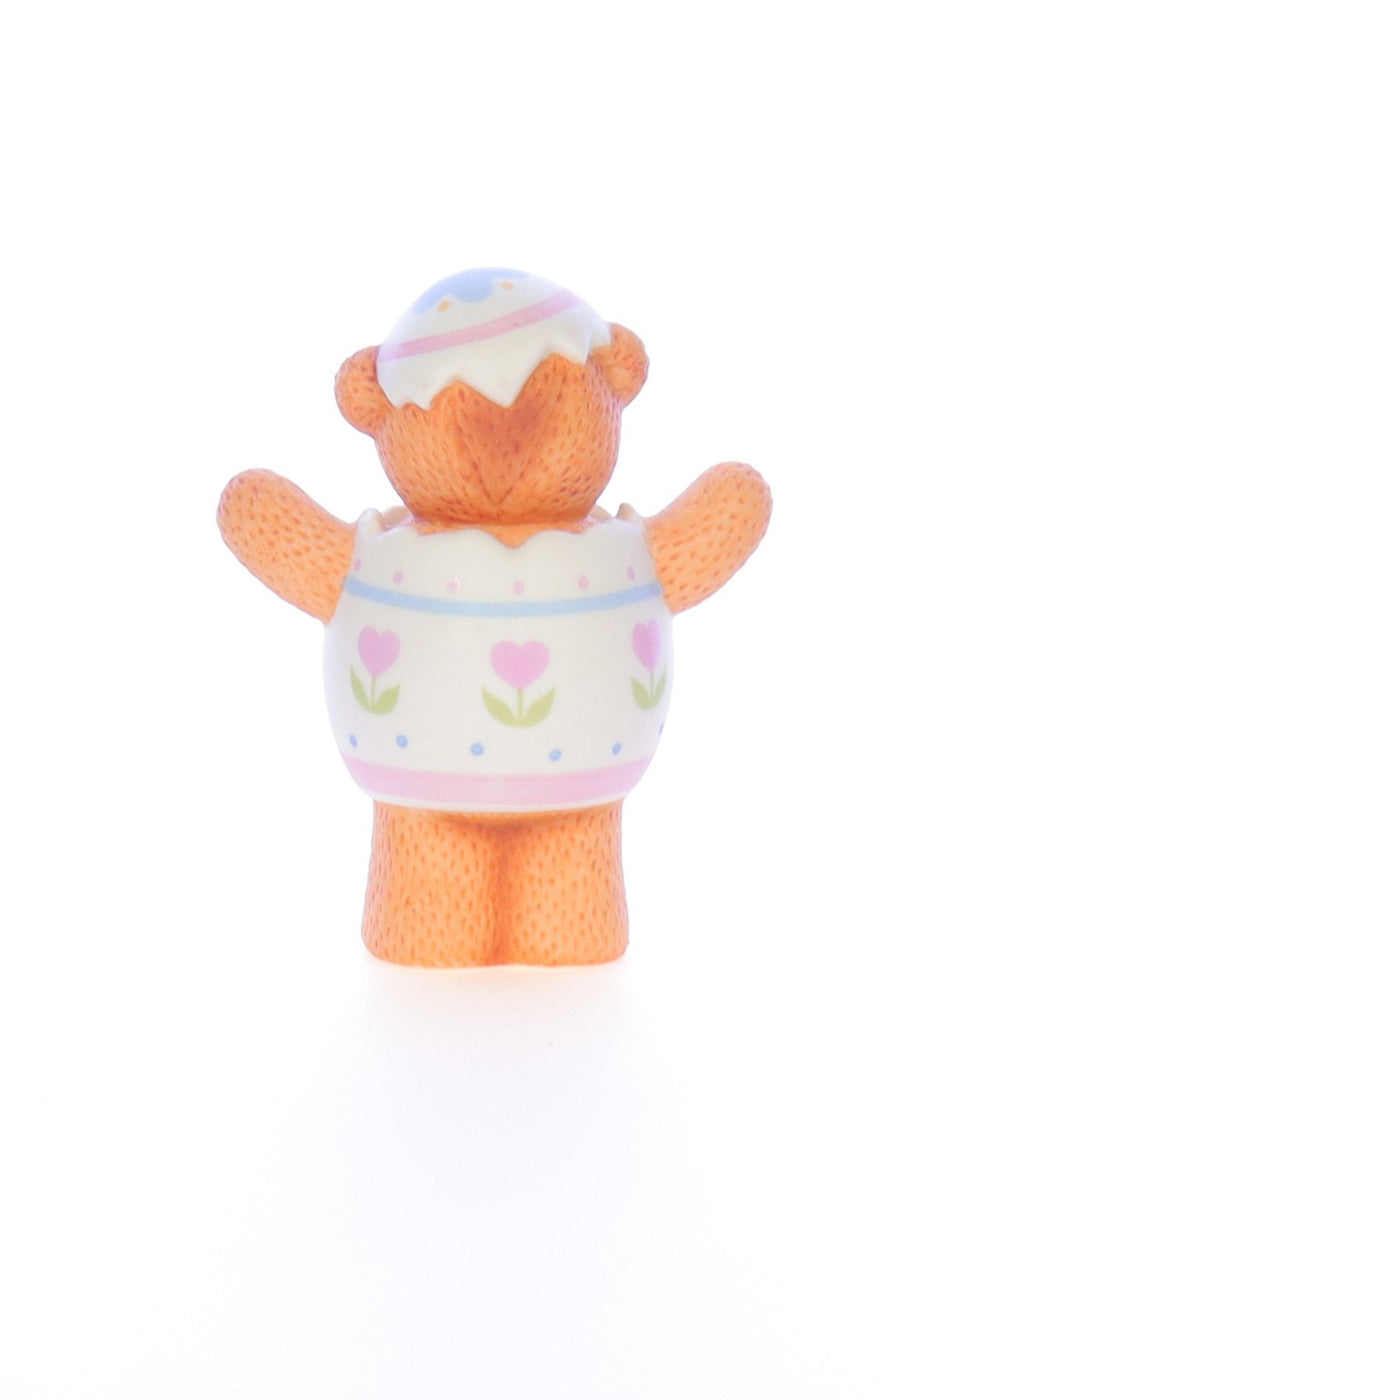 Lucy_And_Me_by_Lucy_Atwell_Porcelain_Figurine_Bear_in_Easter_Egg_Costume_Lucy_Unknown_056_05